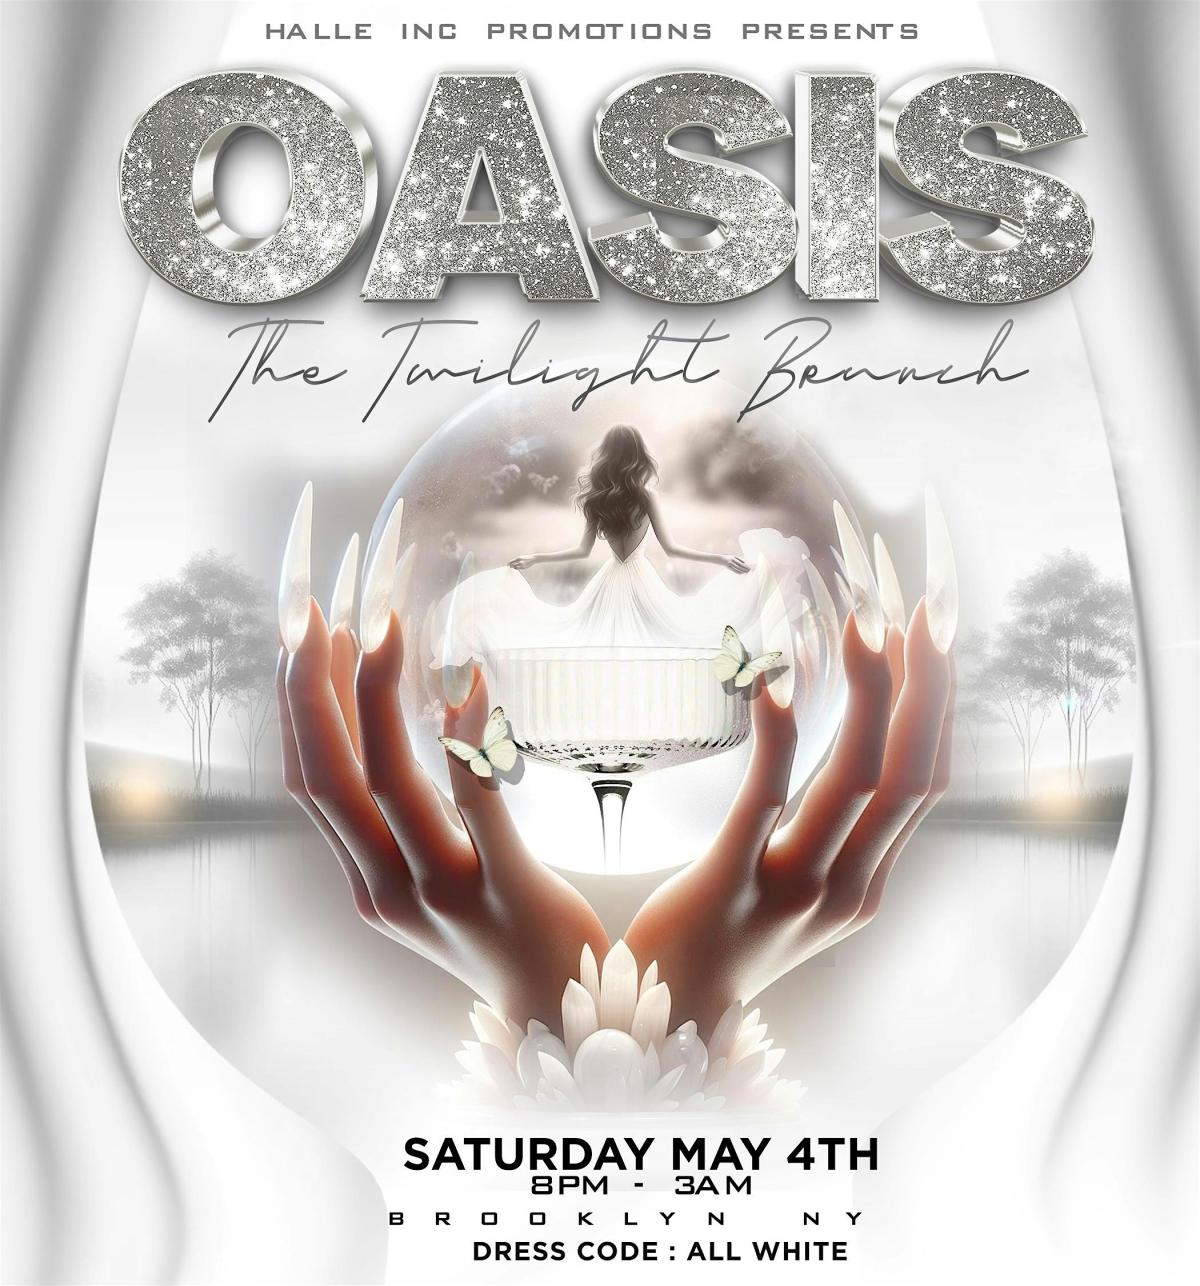 Oasis- "The Twilight Brunch" flyer or graphic.